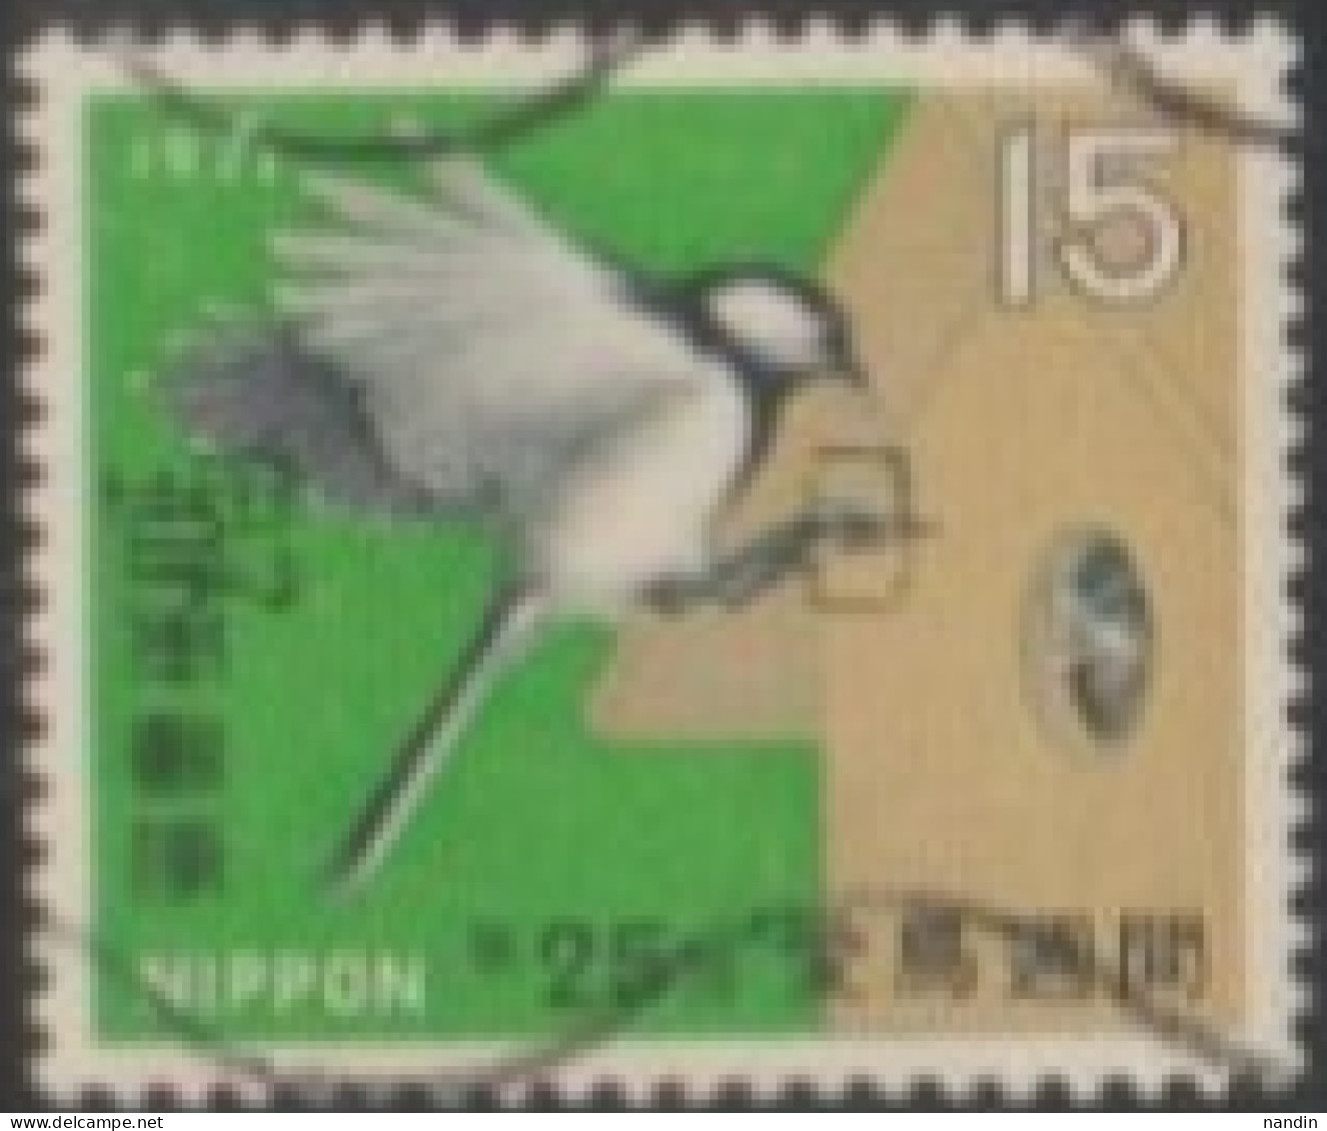 1971 JAPAN USED STAMP  ON BIRDS/The 25th Bird Week/Great Tit - Songbirds & Tree Dwellers